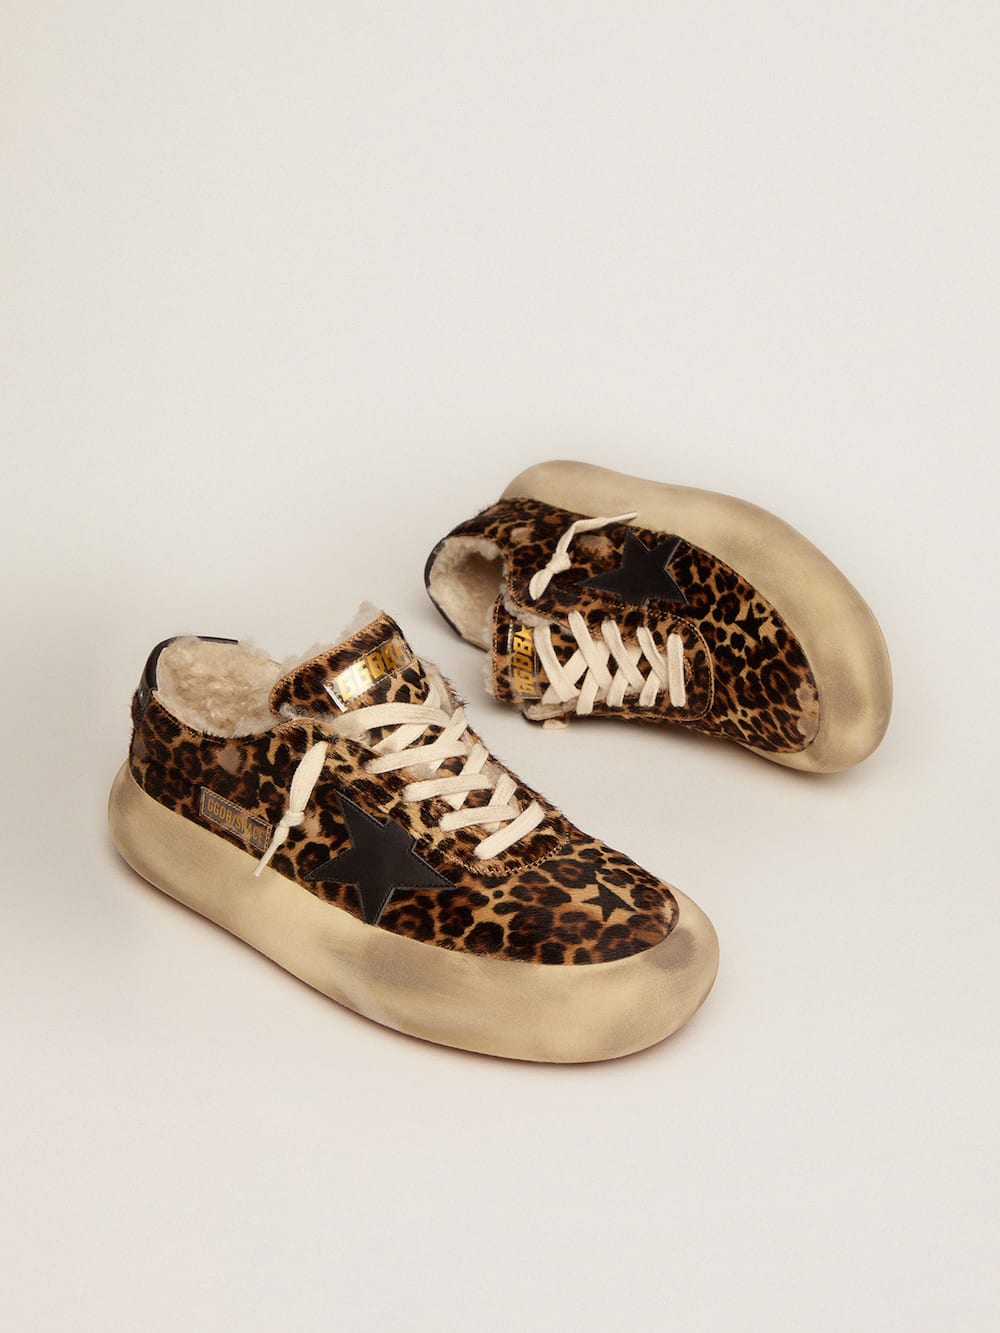 Golden Goose - Men's Space-Star in animal print pony skin and shearling lining in 